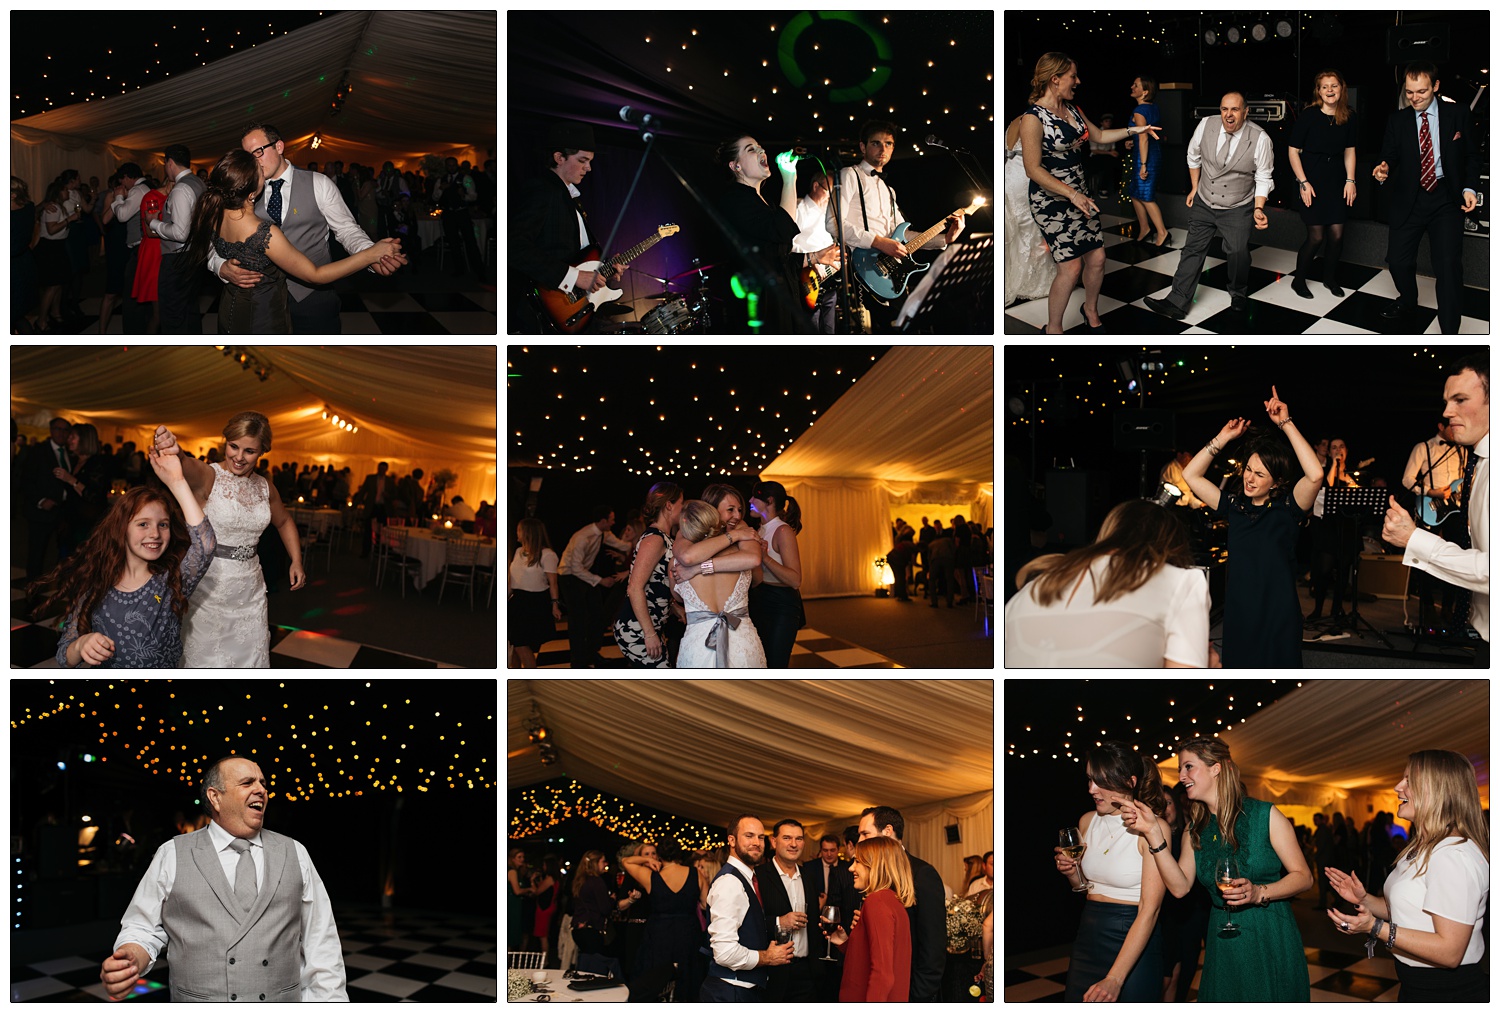 A selection of natural photographs of people dancing at a wedding reception. The floor is black and white chequered and the ceiling is black.